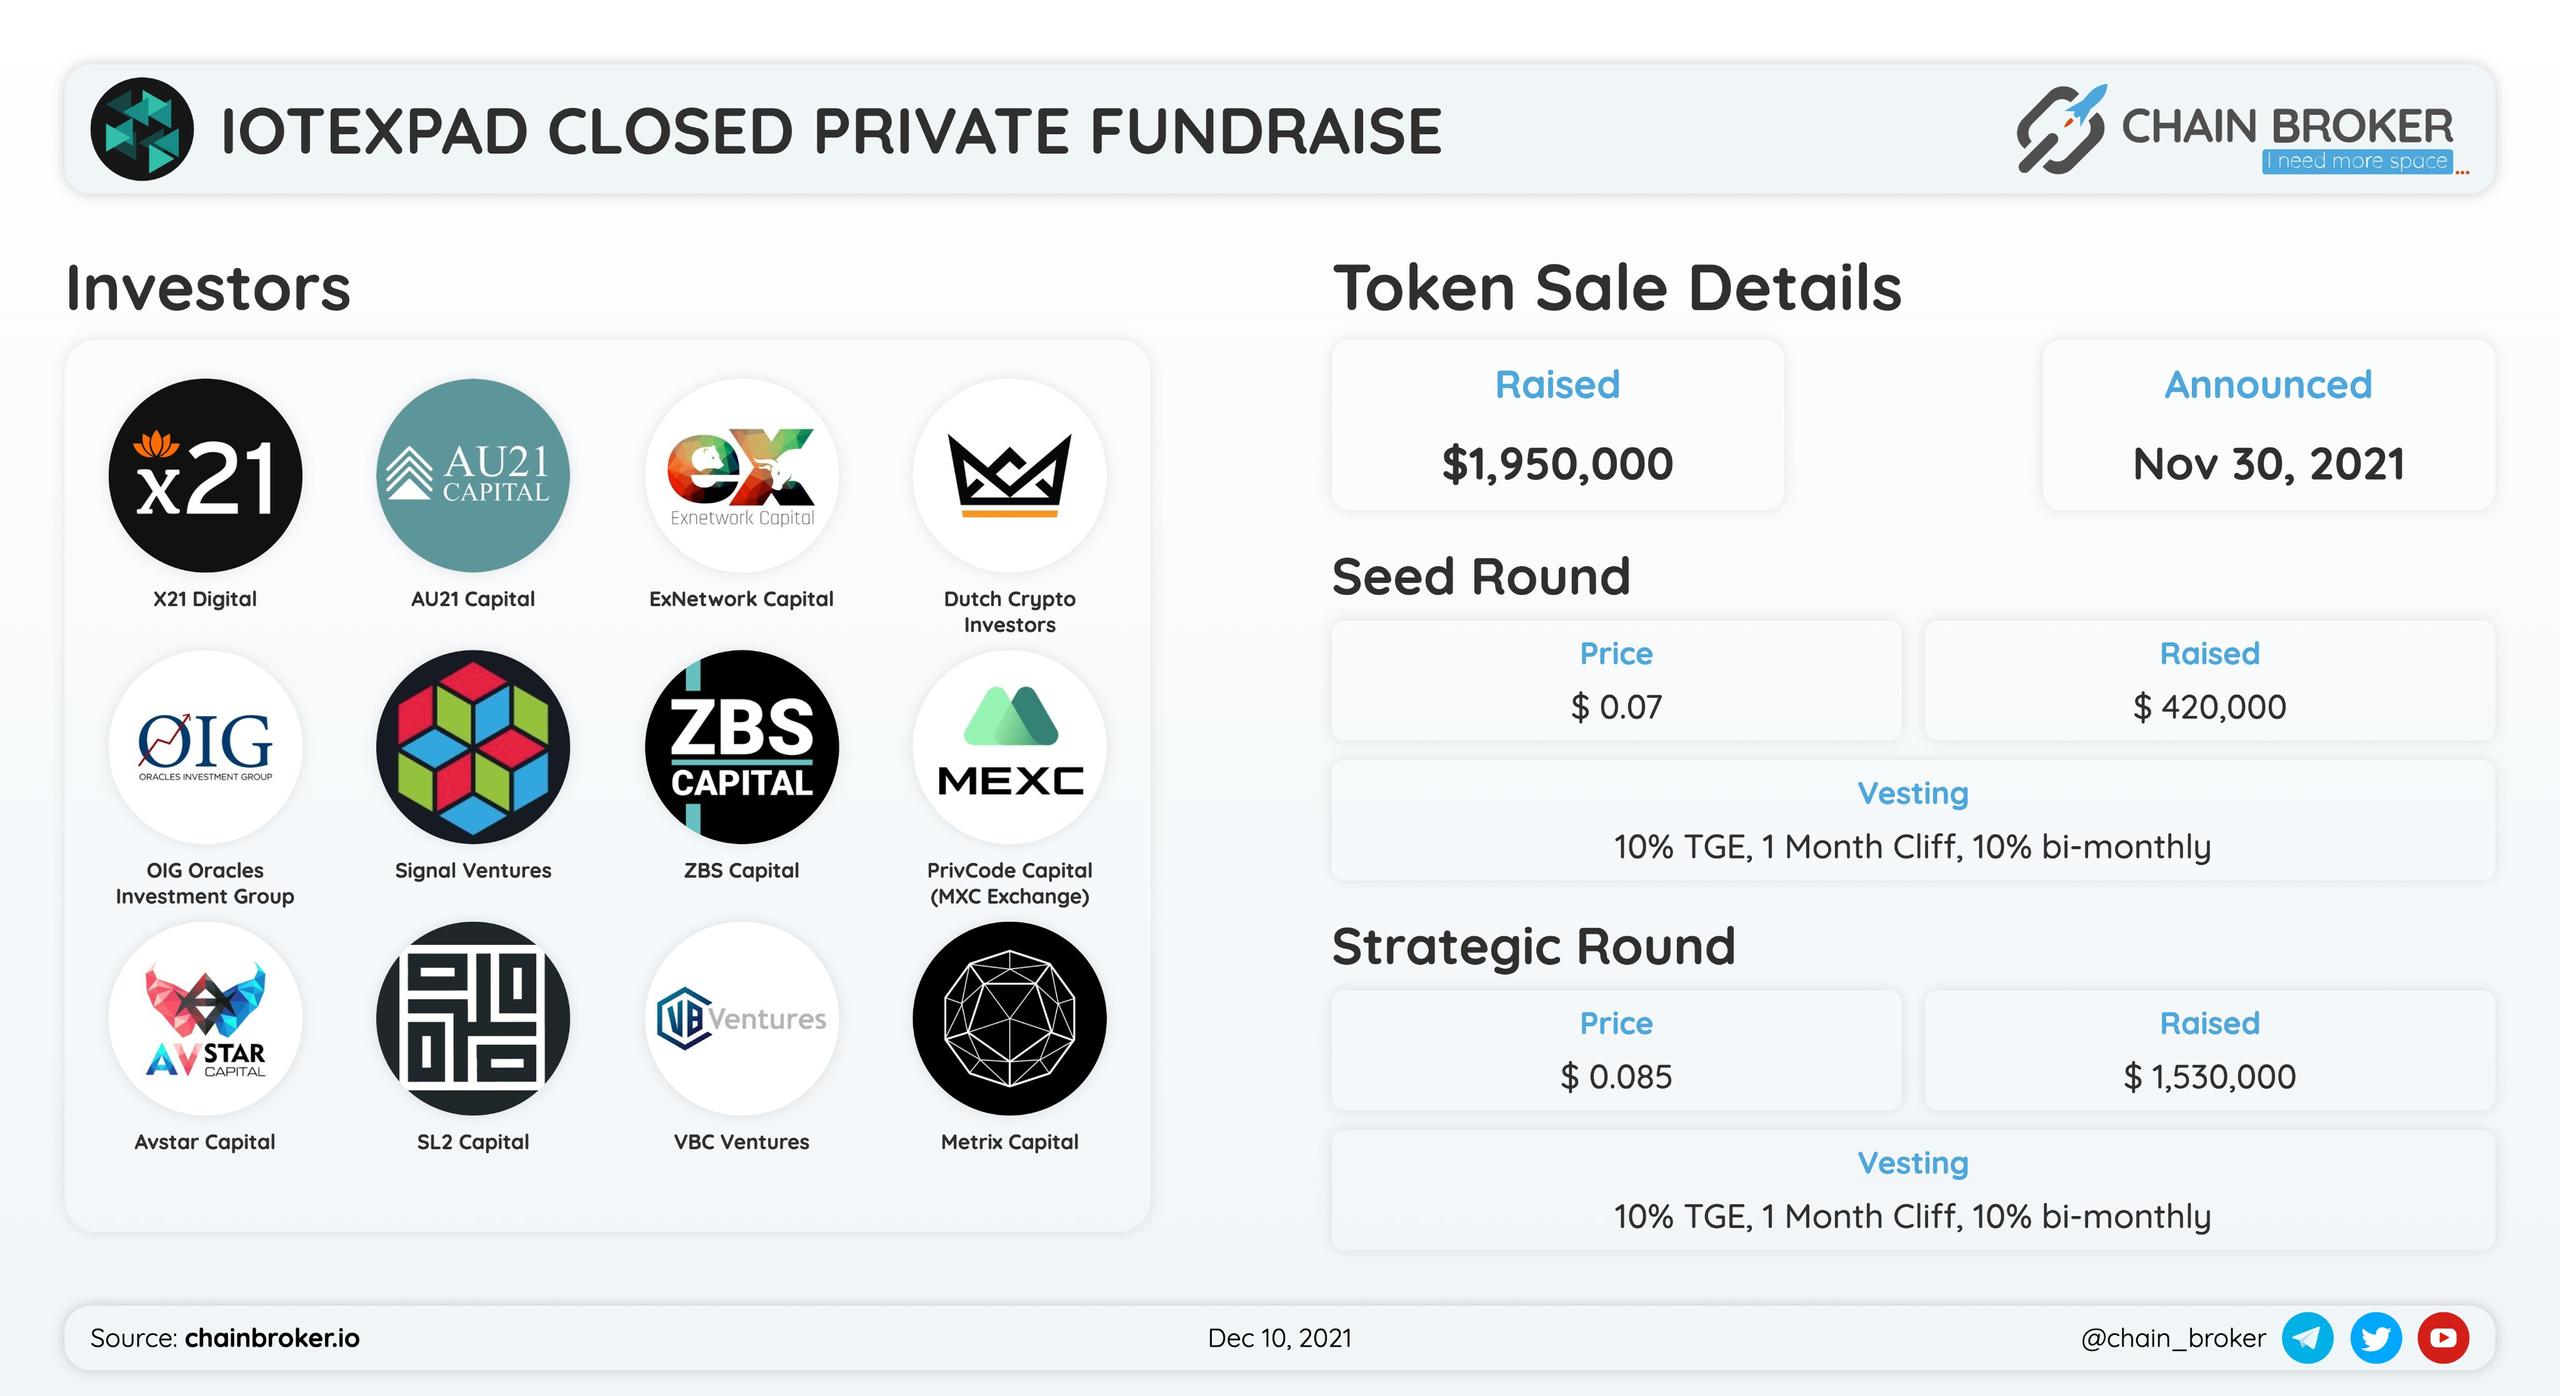 IotexPad has closed $1.95M Seed/Private Round.